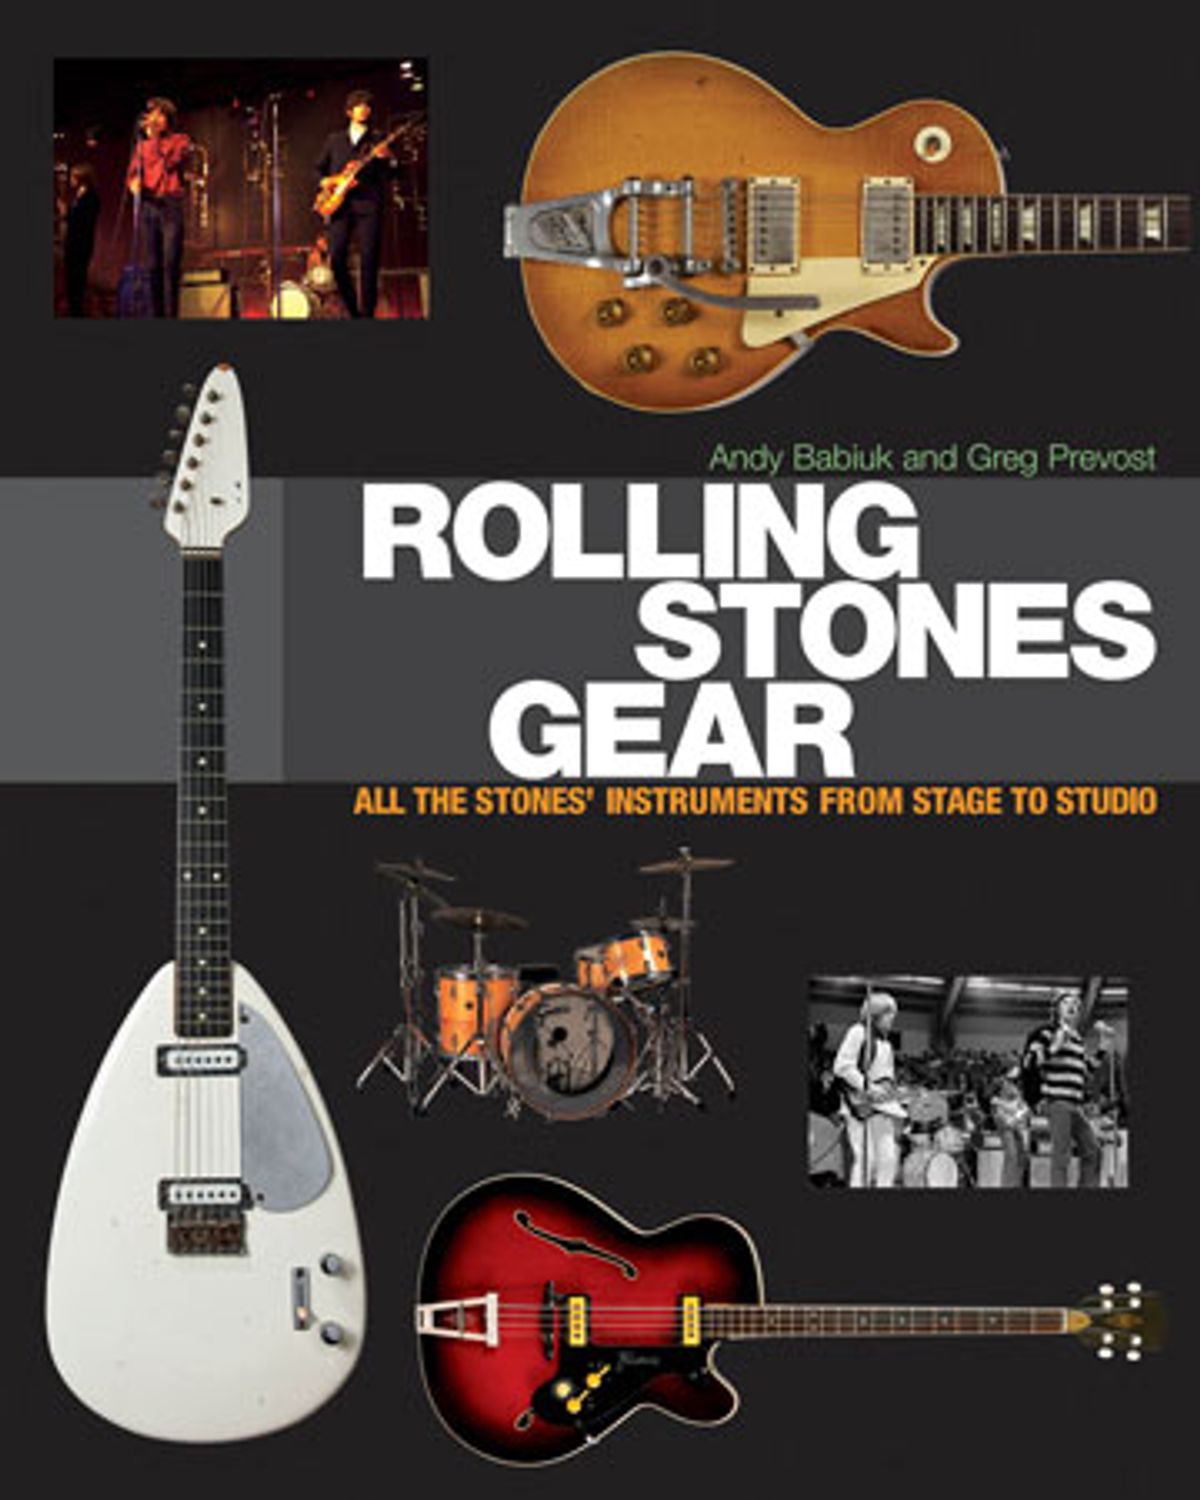 Backbeat Books Publishes "Rolling Stones Gear"